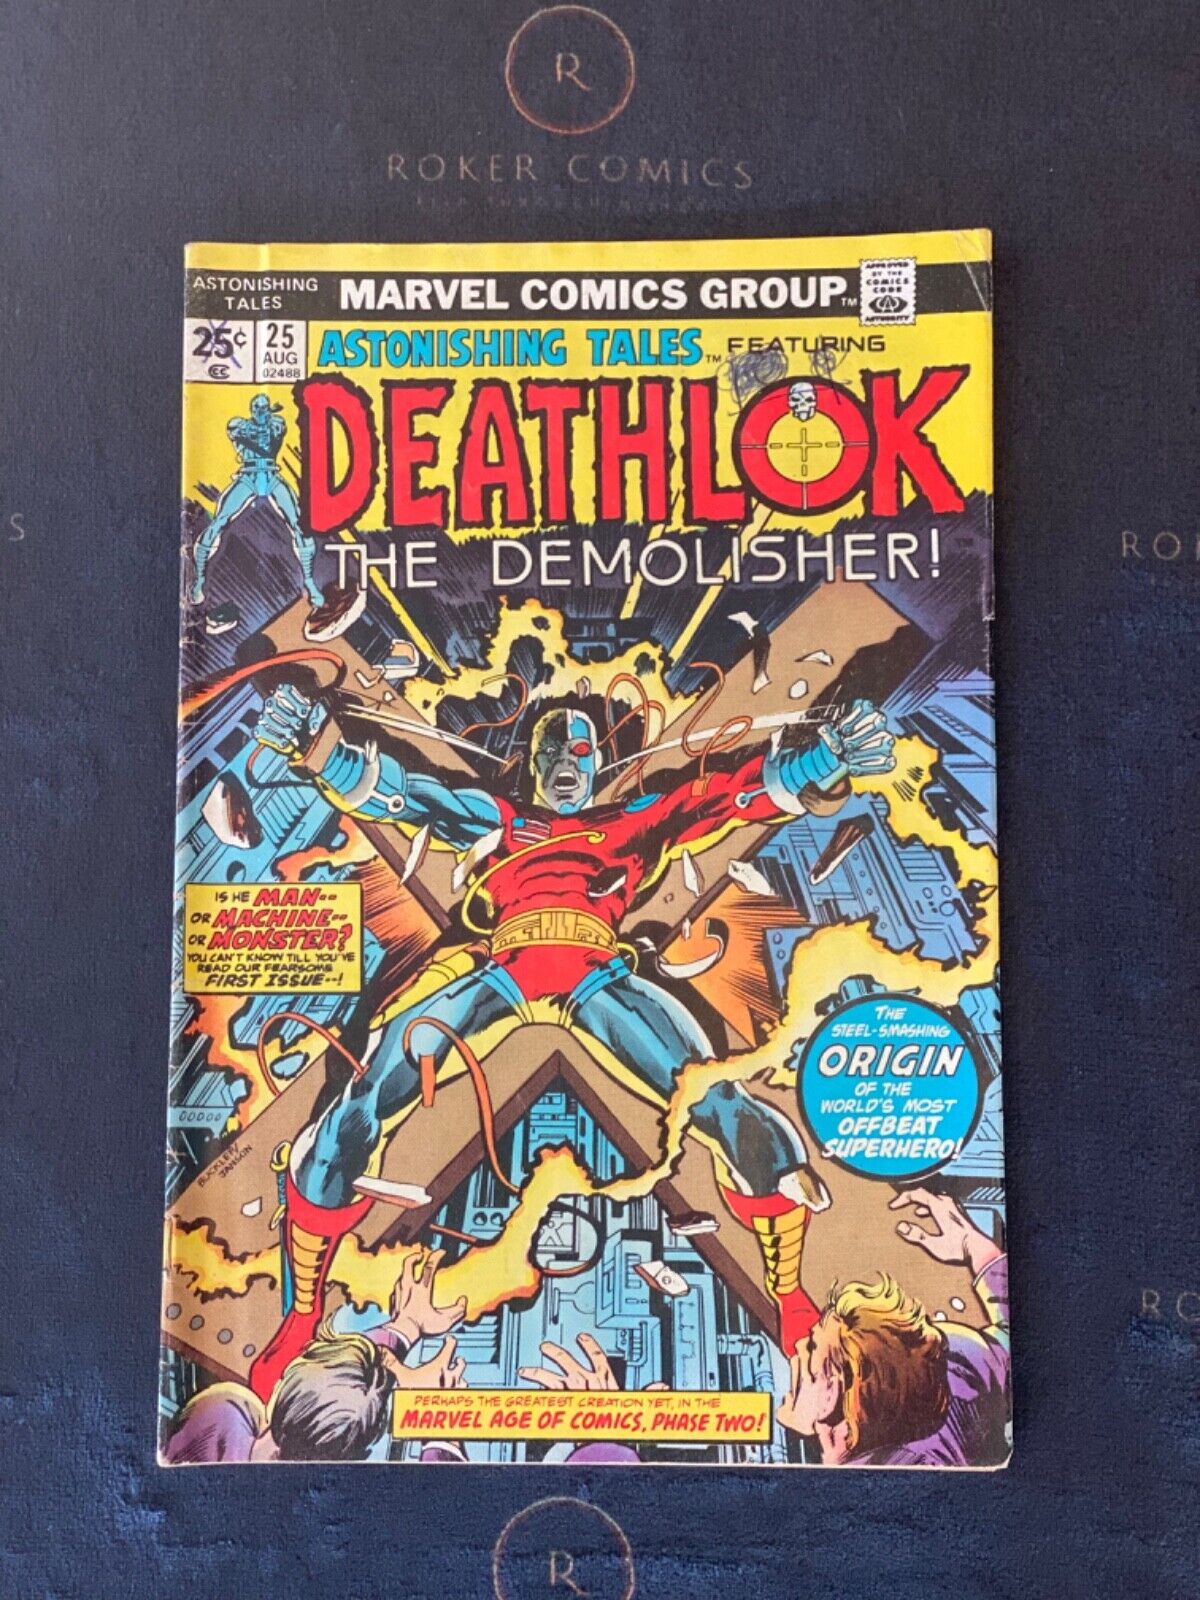 RARE 1974 Astonishing Tales #25 First Appearance Of Deathlok